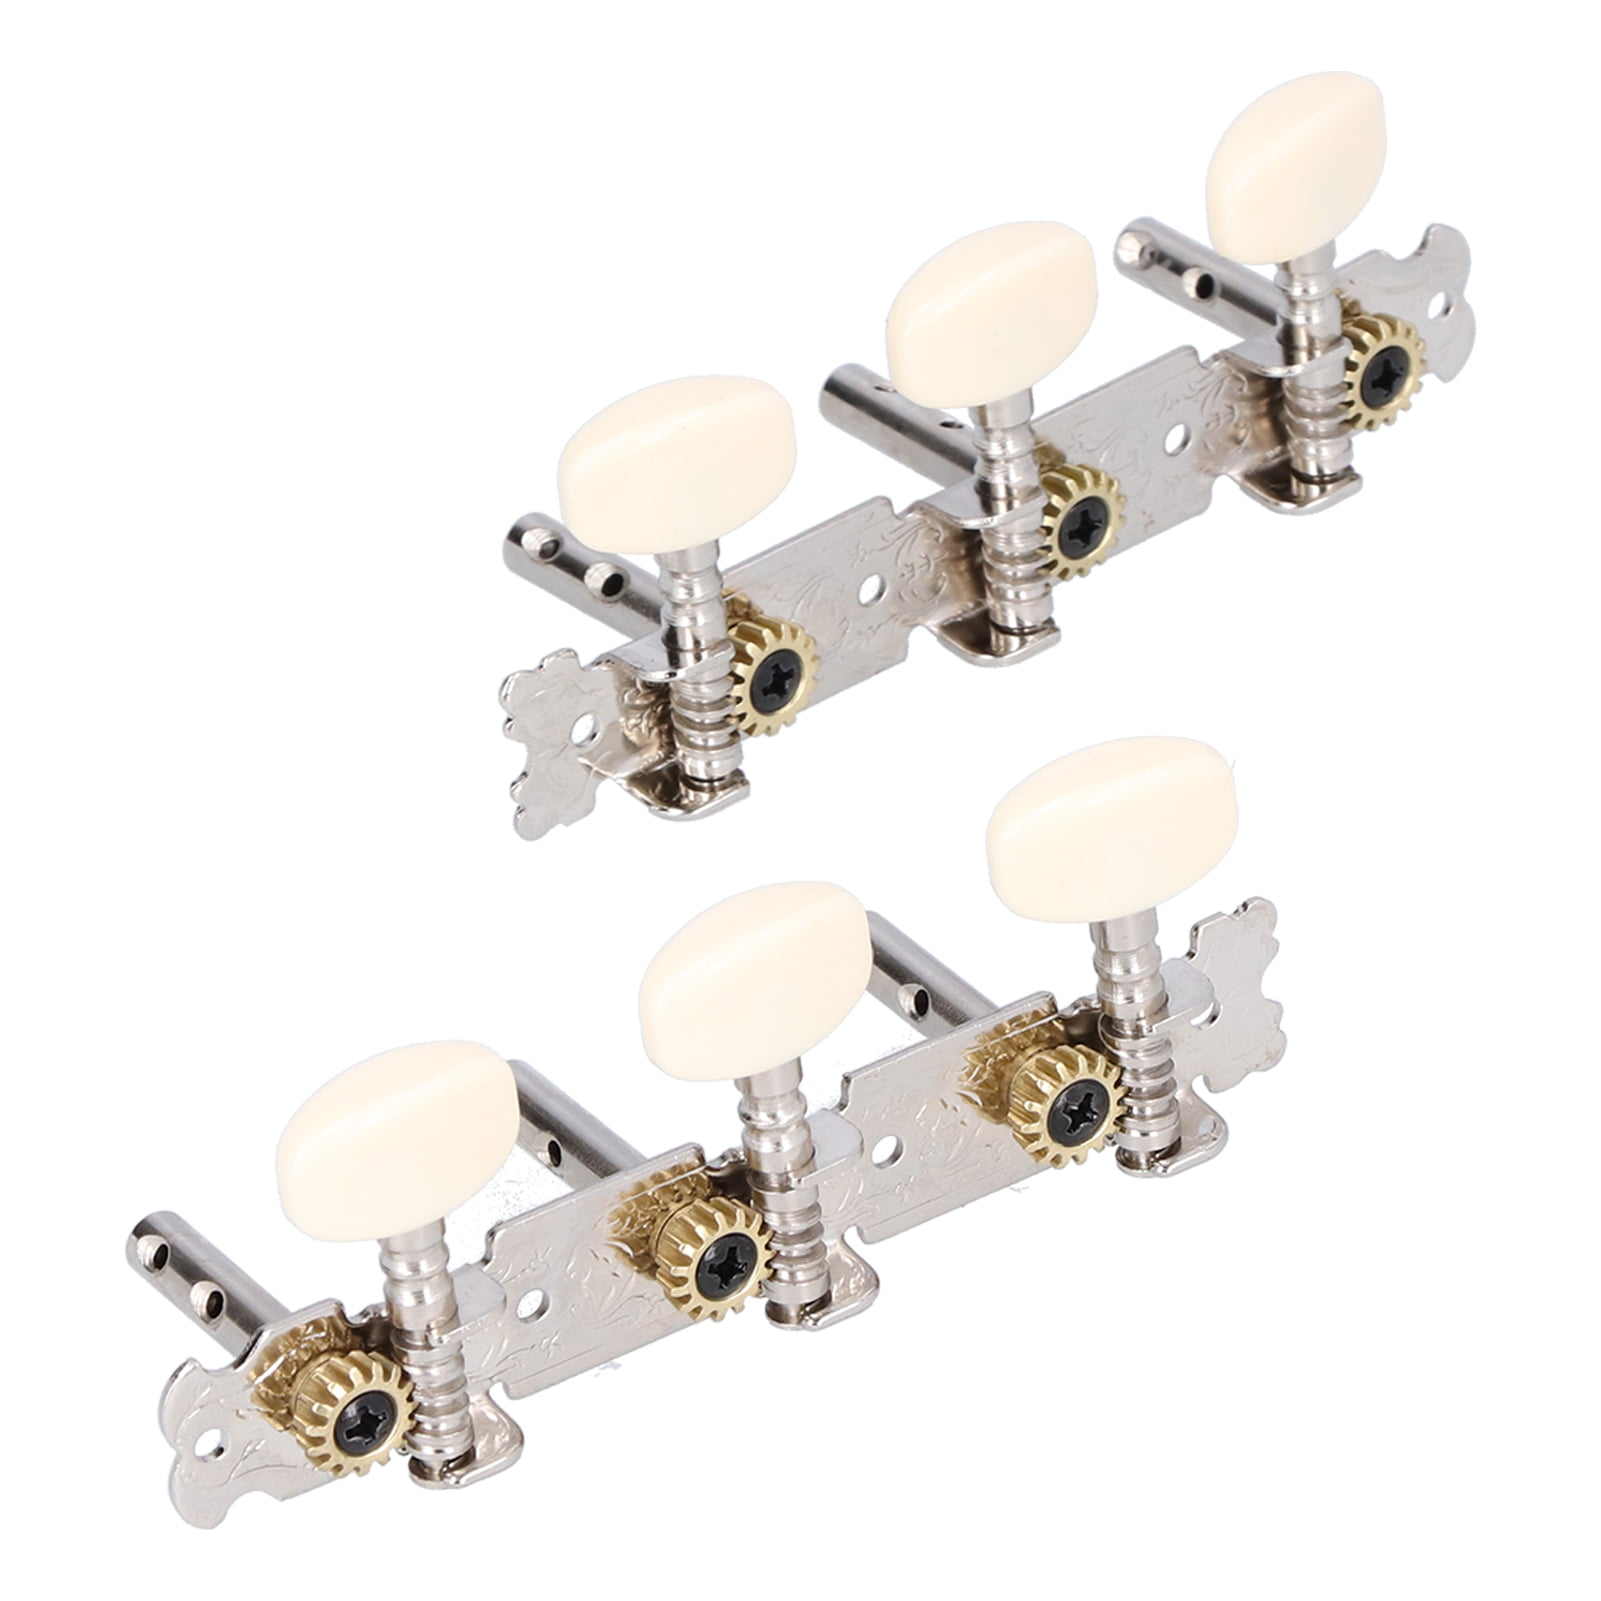 Metallor Classical Guitar Tuning Pegs Machine Heads Tuning Keys Tuners Single Hole 3L 3R Chrome. 